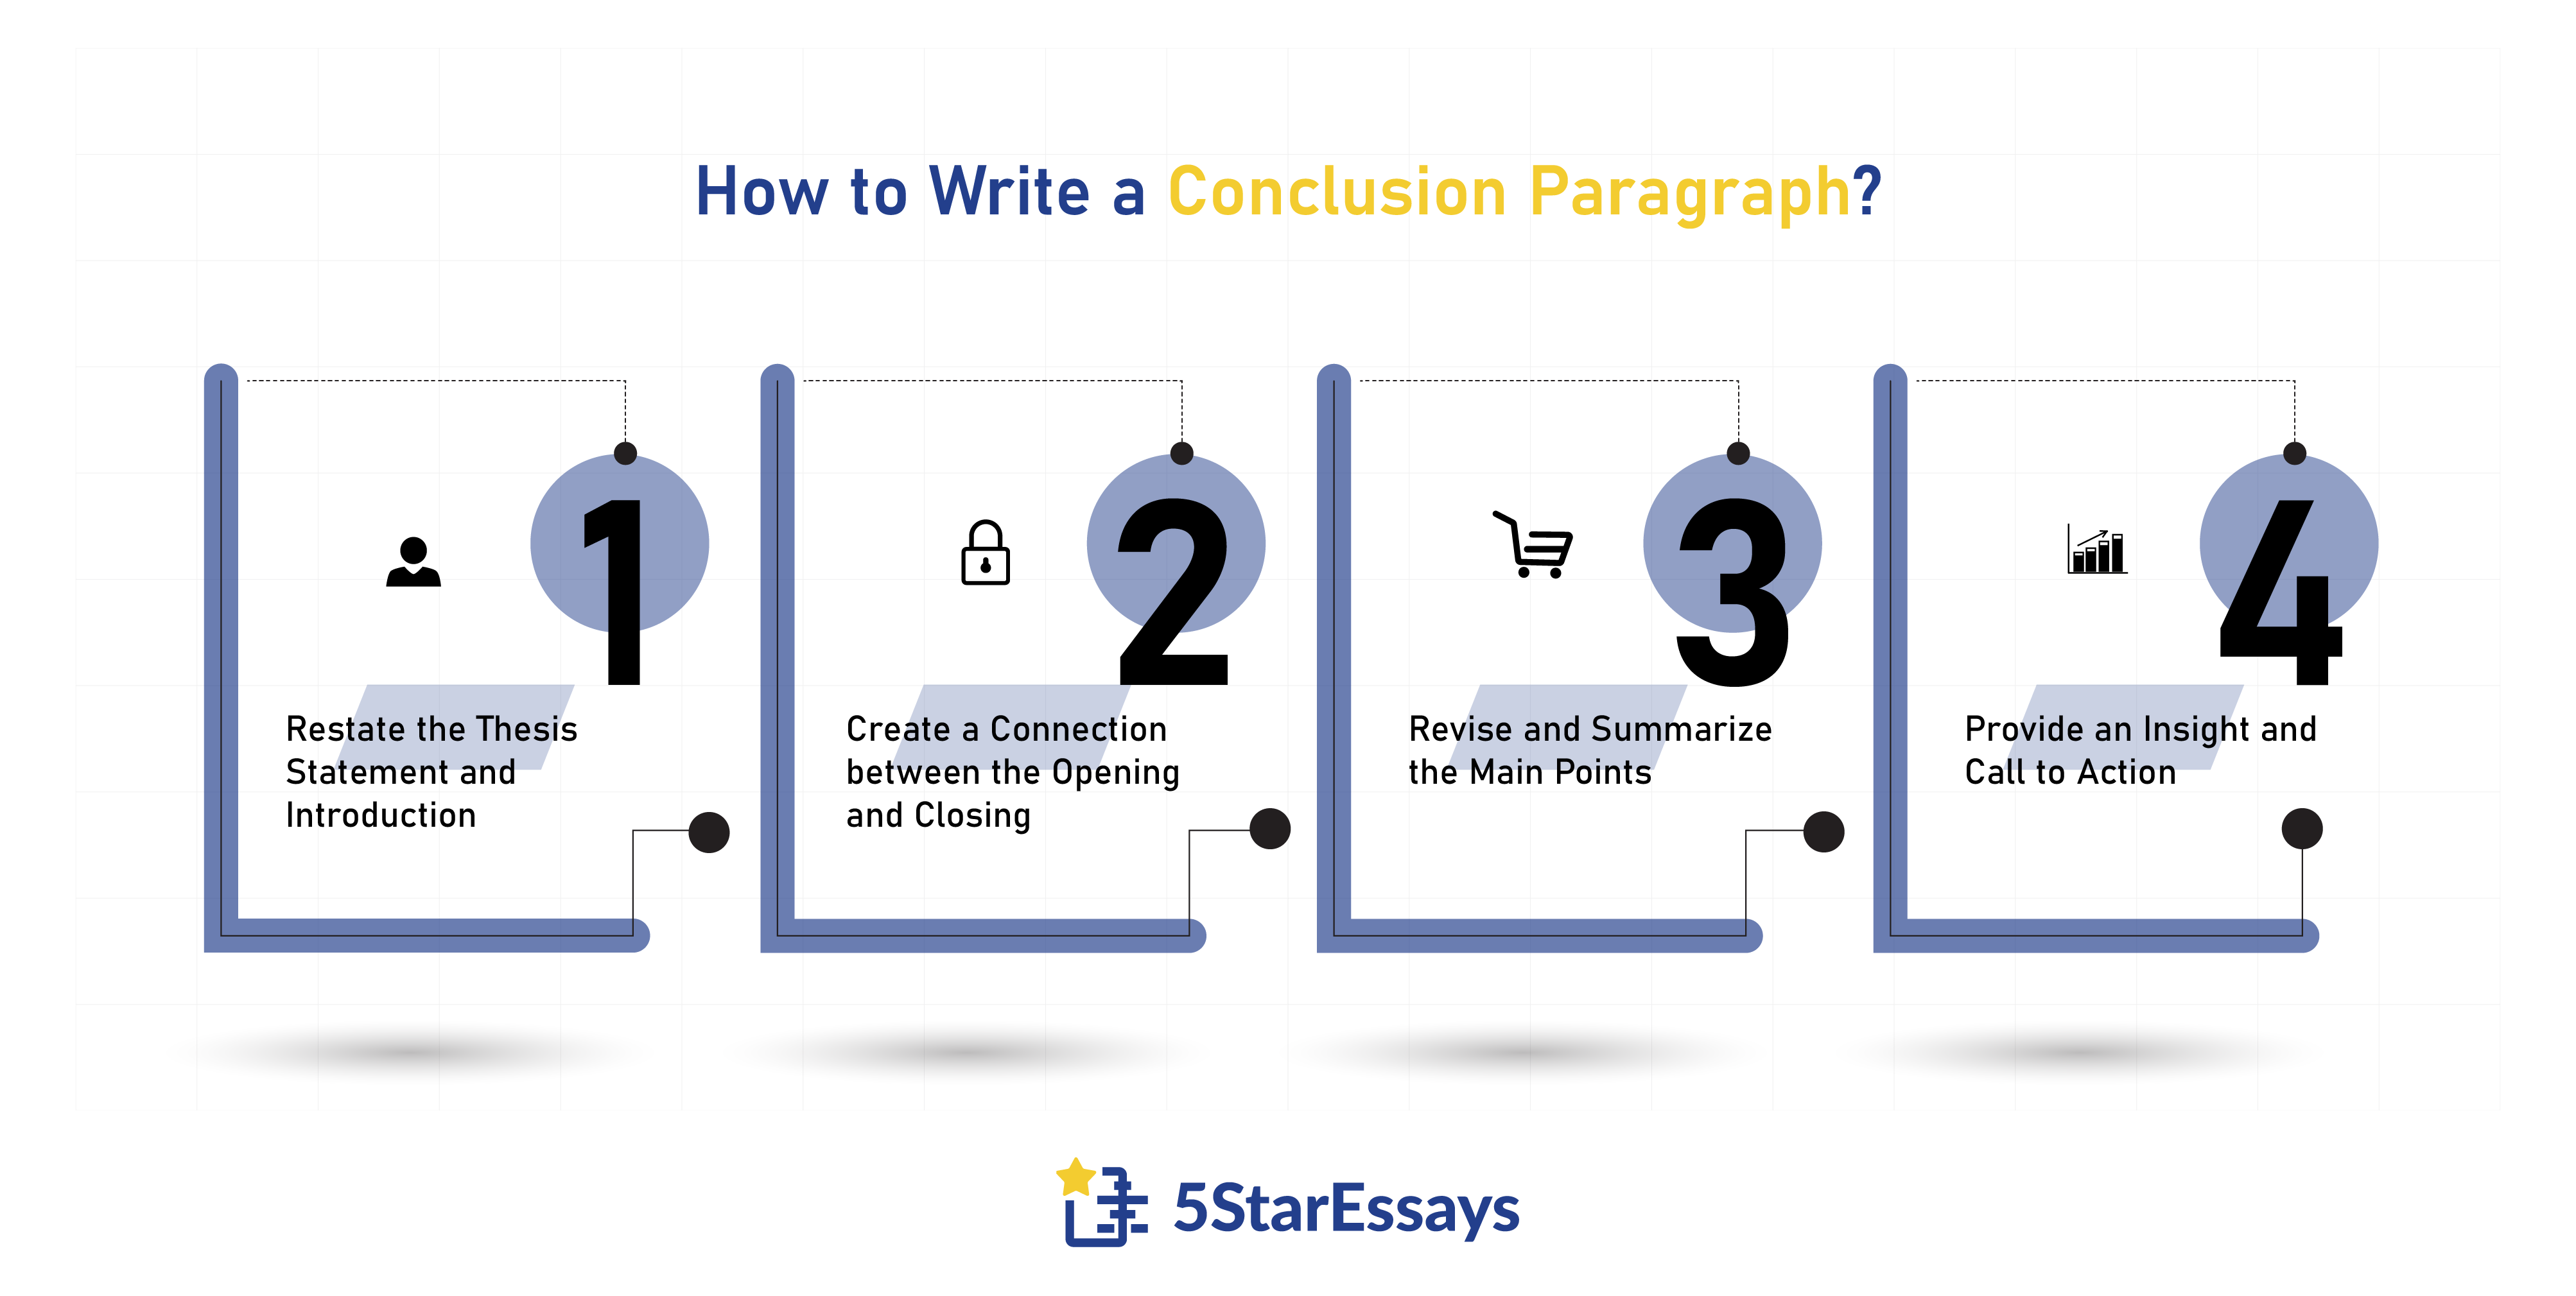 How to Write a Conclusion for Your Essay within Minutes